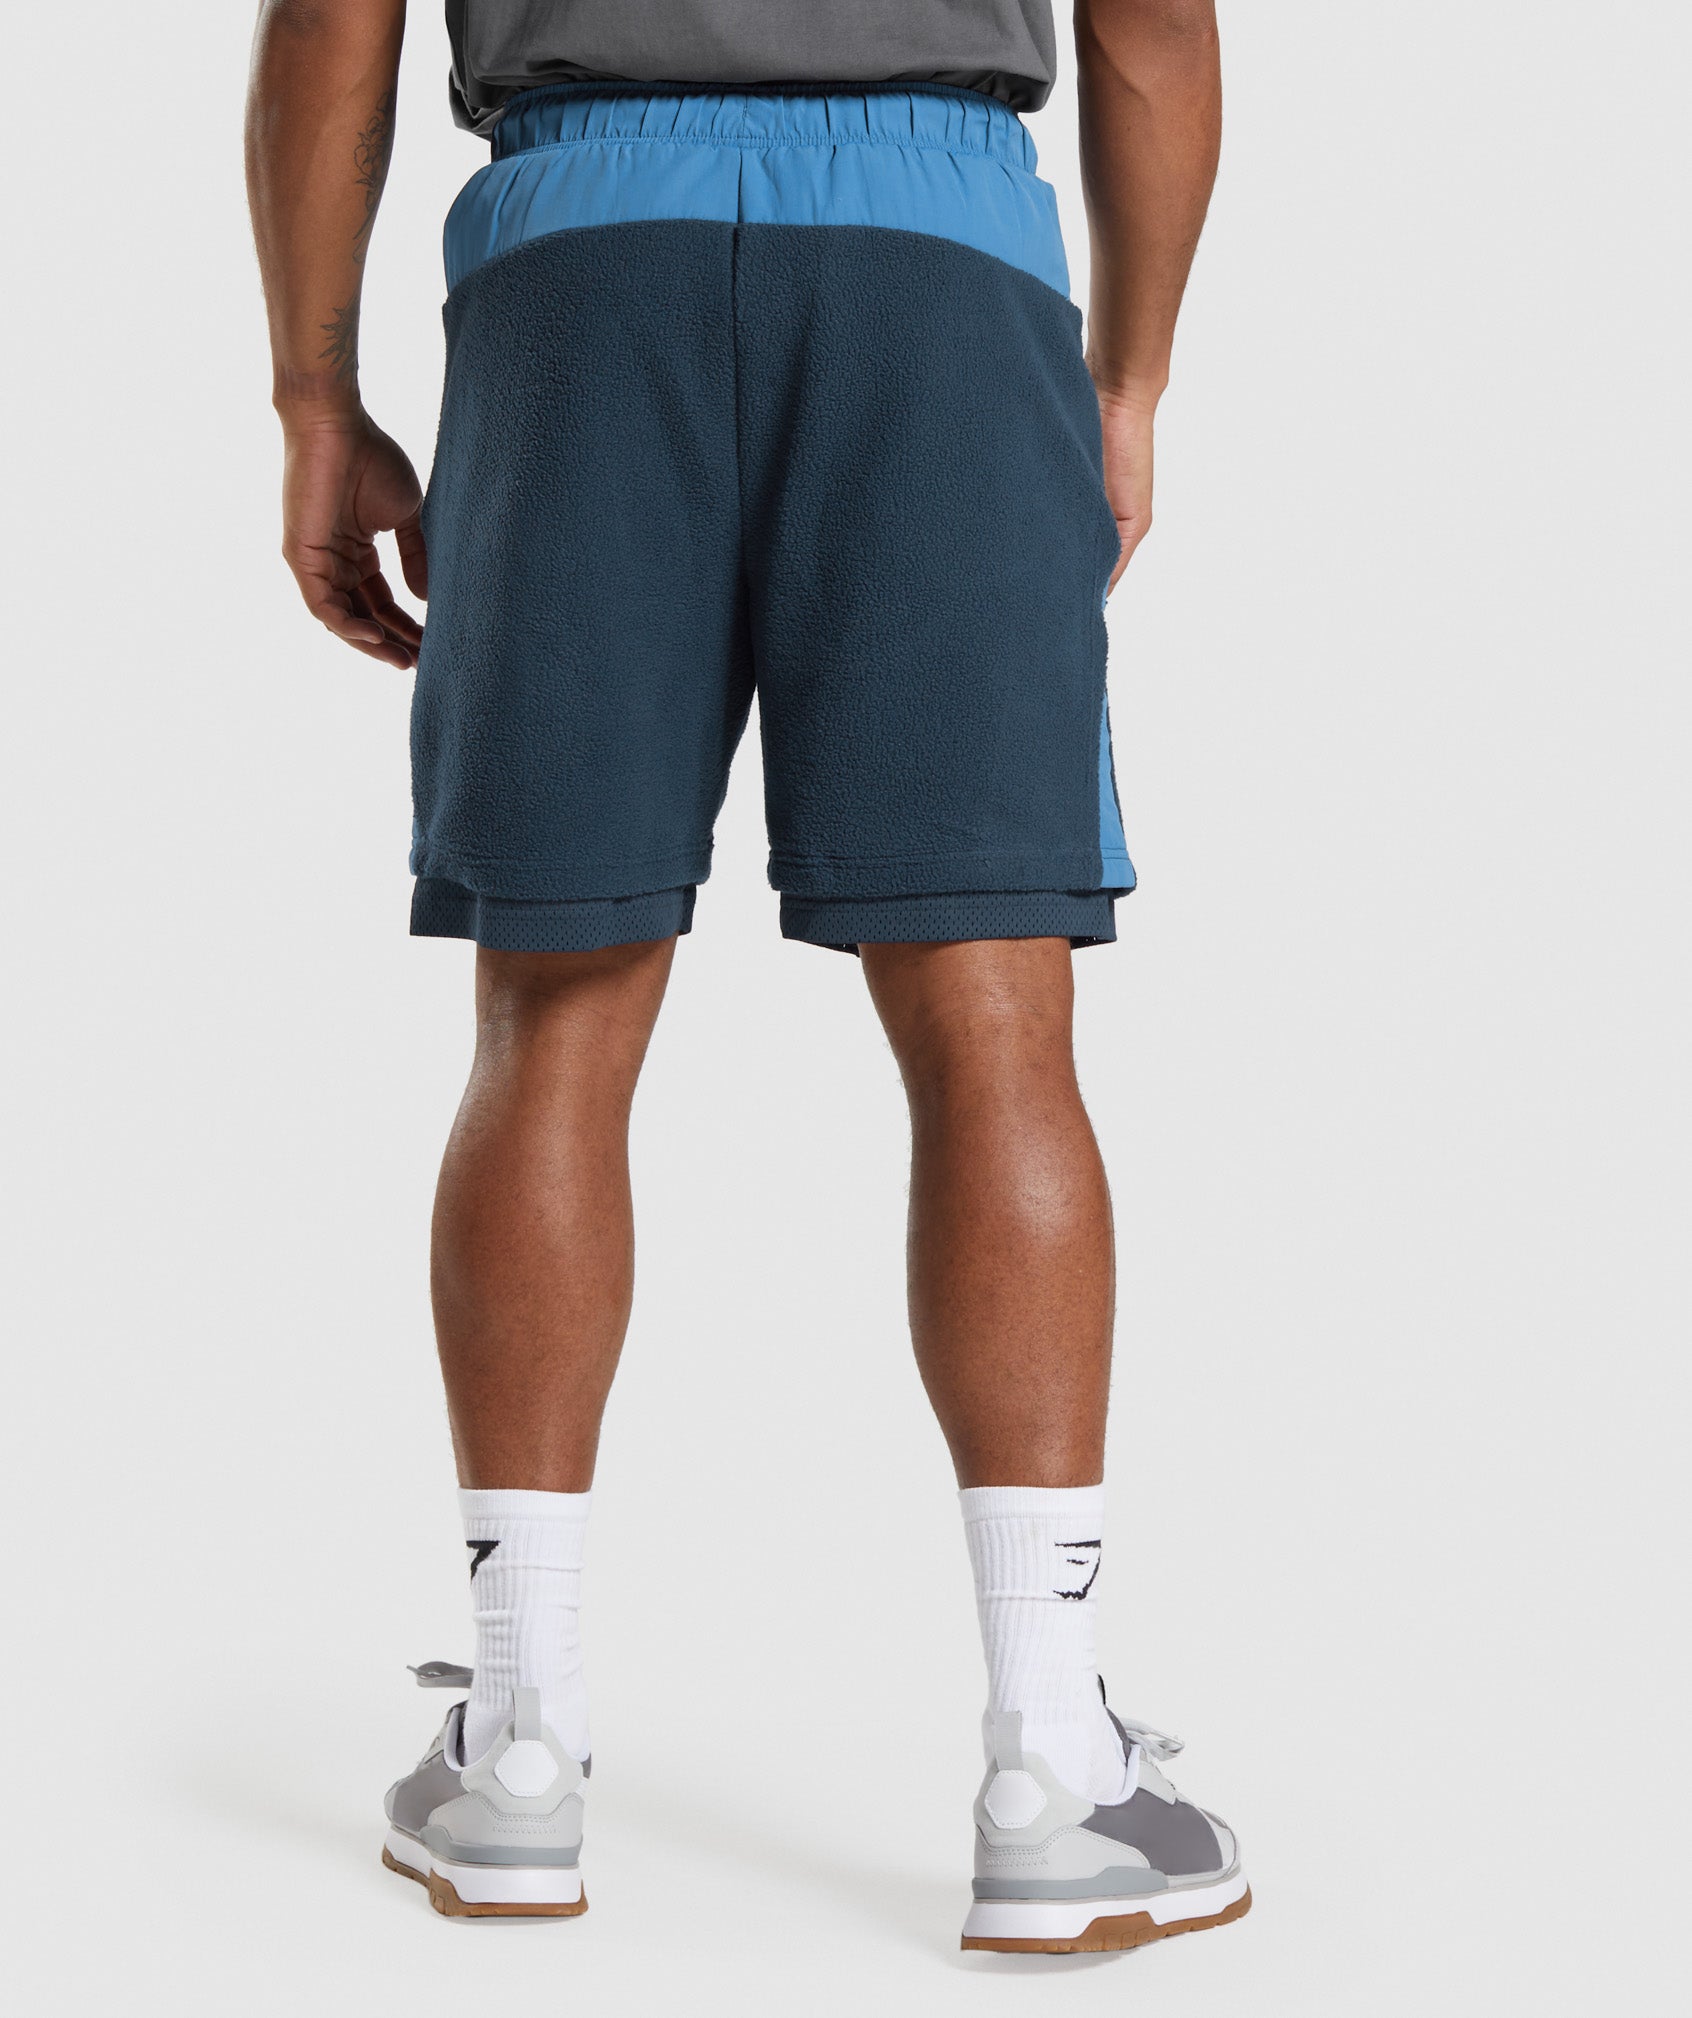 Vibes Shorts in Navy/Lakeside Blue